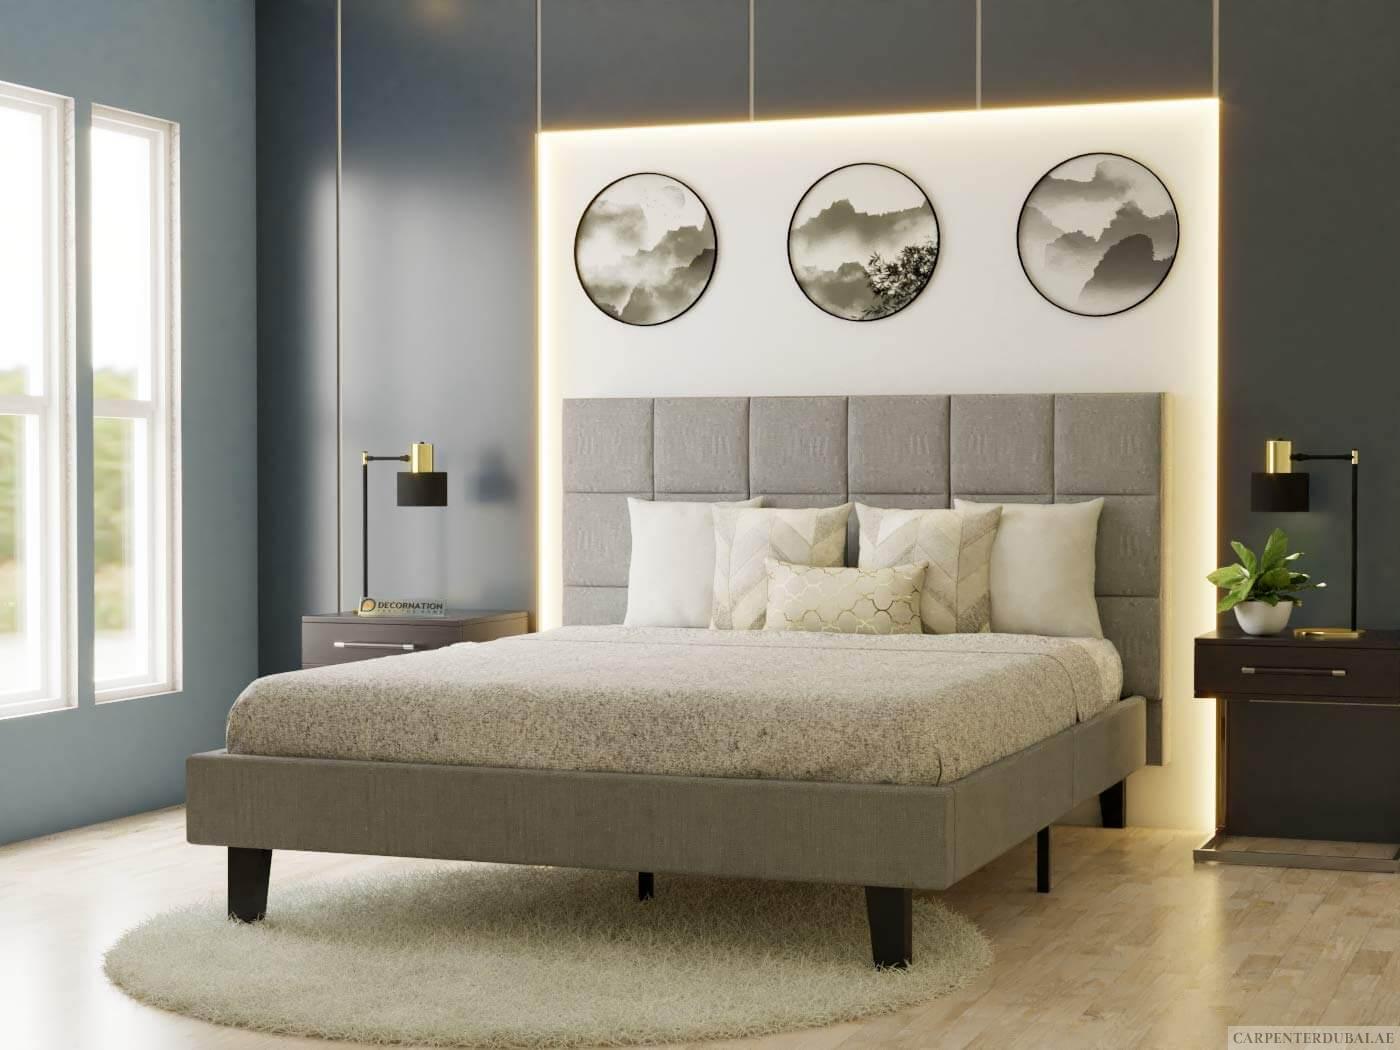 Custom Made Beds | Bespoke and Hand Made Bed | Save Upto 30%